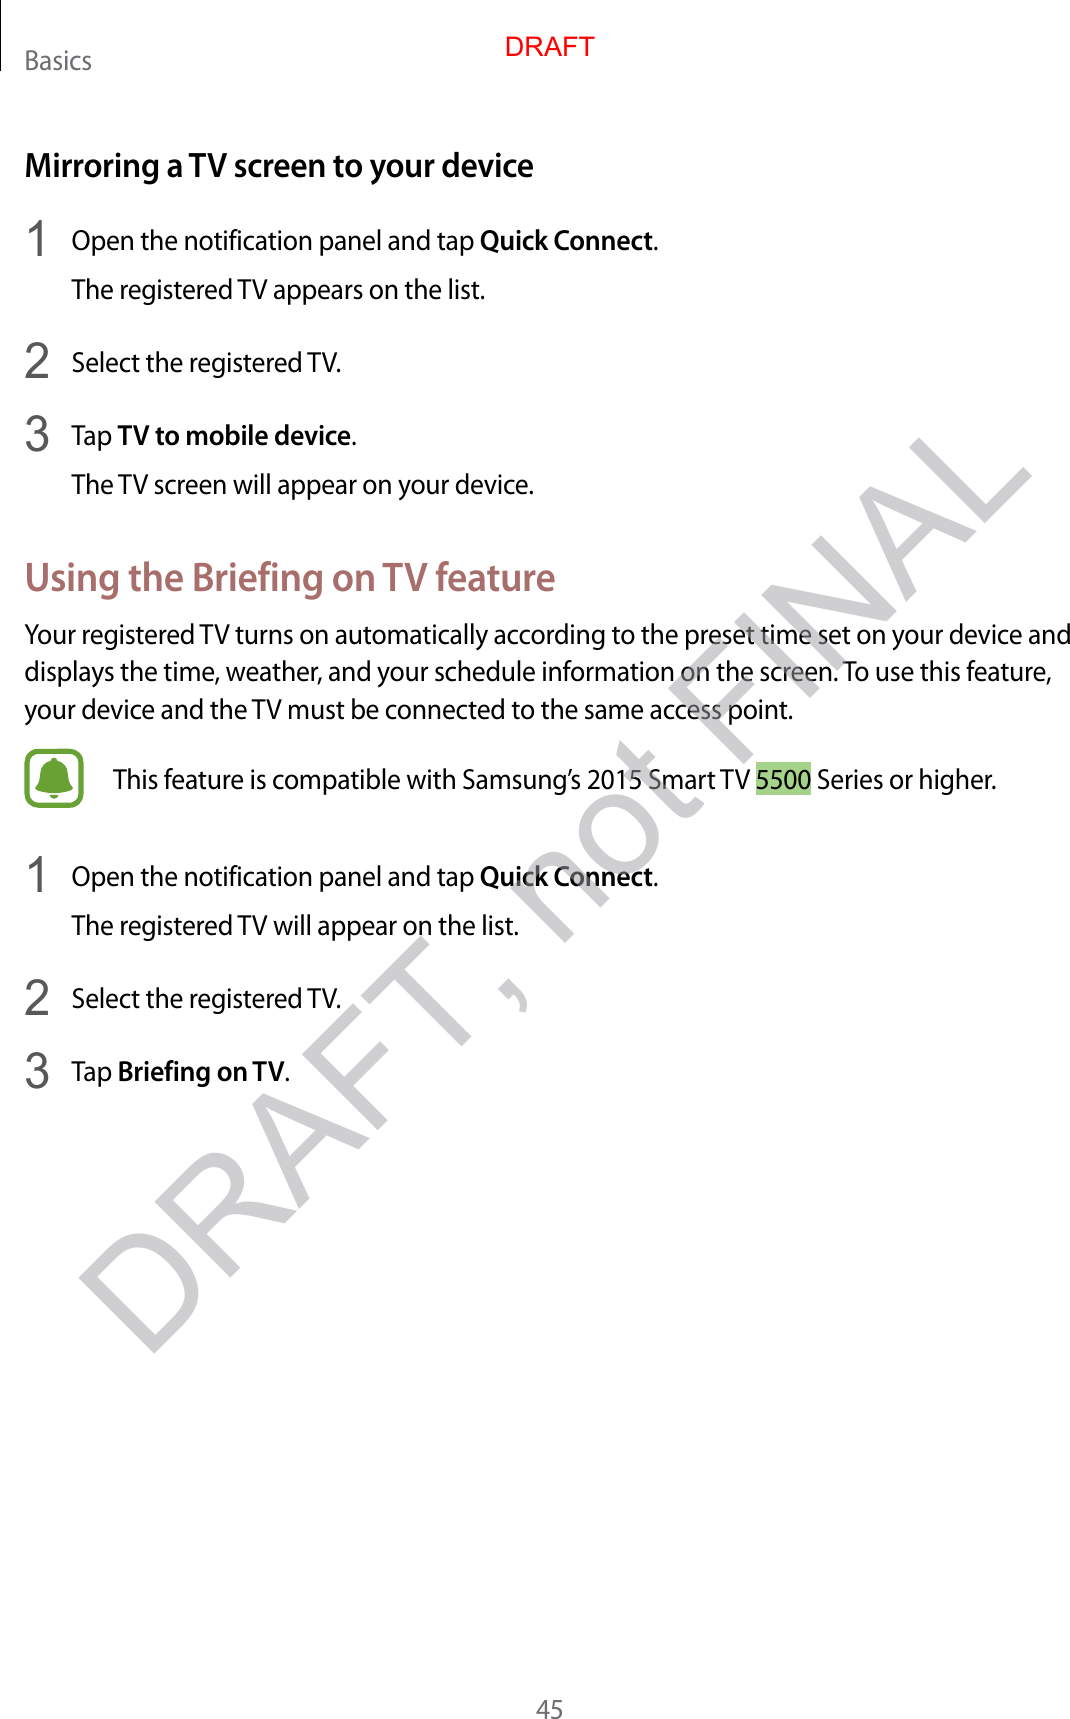 Basics45Mirroring a TV screen to y our devic e1  Open the notification panel and tap Quick Connect.The reg ist er ed TV appears on the list.2  Select the reg ister ed TV.3  Tap TV to mobile device.The TV screen will appear on your devic e .Using the Briefing on TV fea tur eYour register ed TV turns on automatically accor ding t o the pr eset time set on y our device and displays the time , w ea ther, and your schedule information on the scr een. To use this feature , your device and the TV must be connected to the same access point.This f eatur e is c ompatible with Samsung’s 2015 Smart TV 5500 Series or higher.1  Open the notification panel and tap Quick Connect.The reg ist er ed TV will appear on the list.2  Select the reg ister ed TV.3  Tap Briefing on TV.DRAFTDRAFT, not FINAL